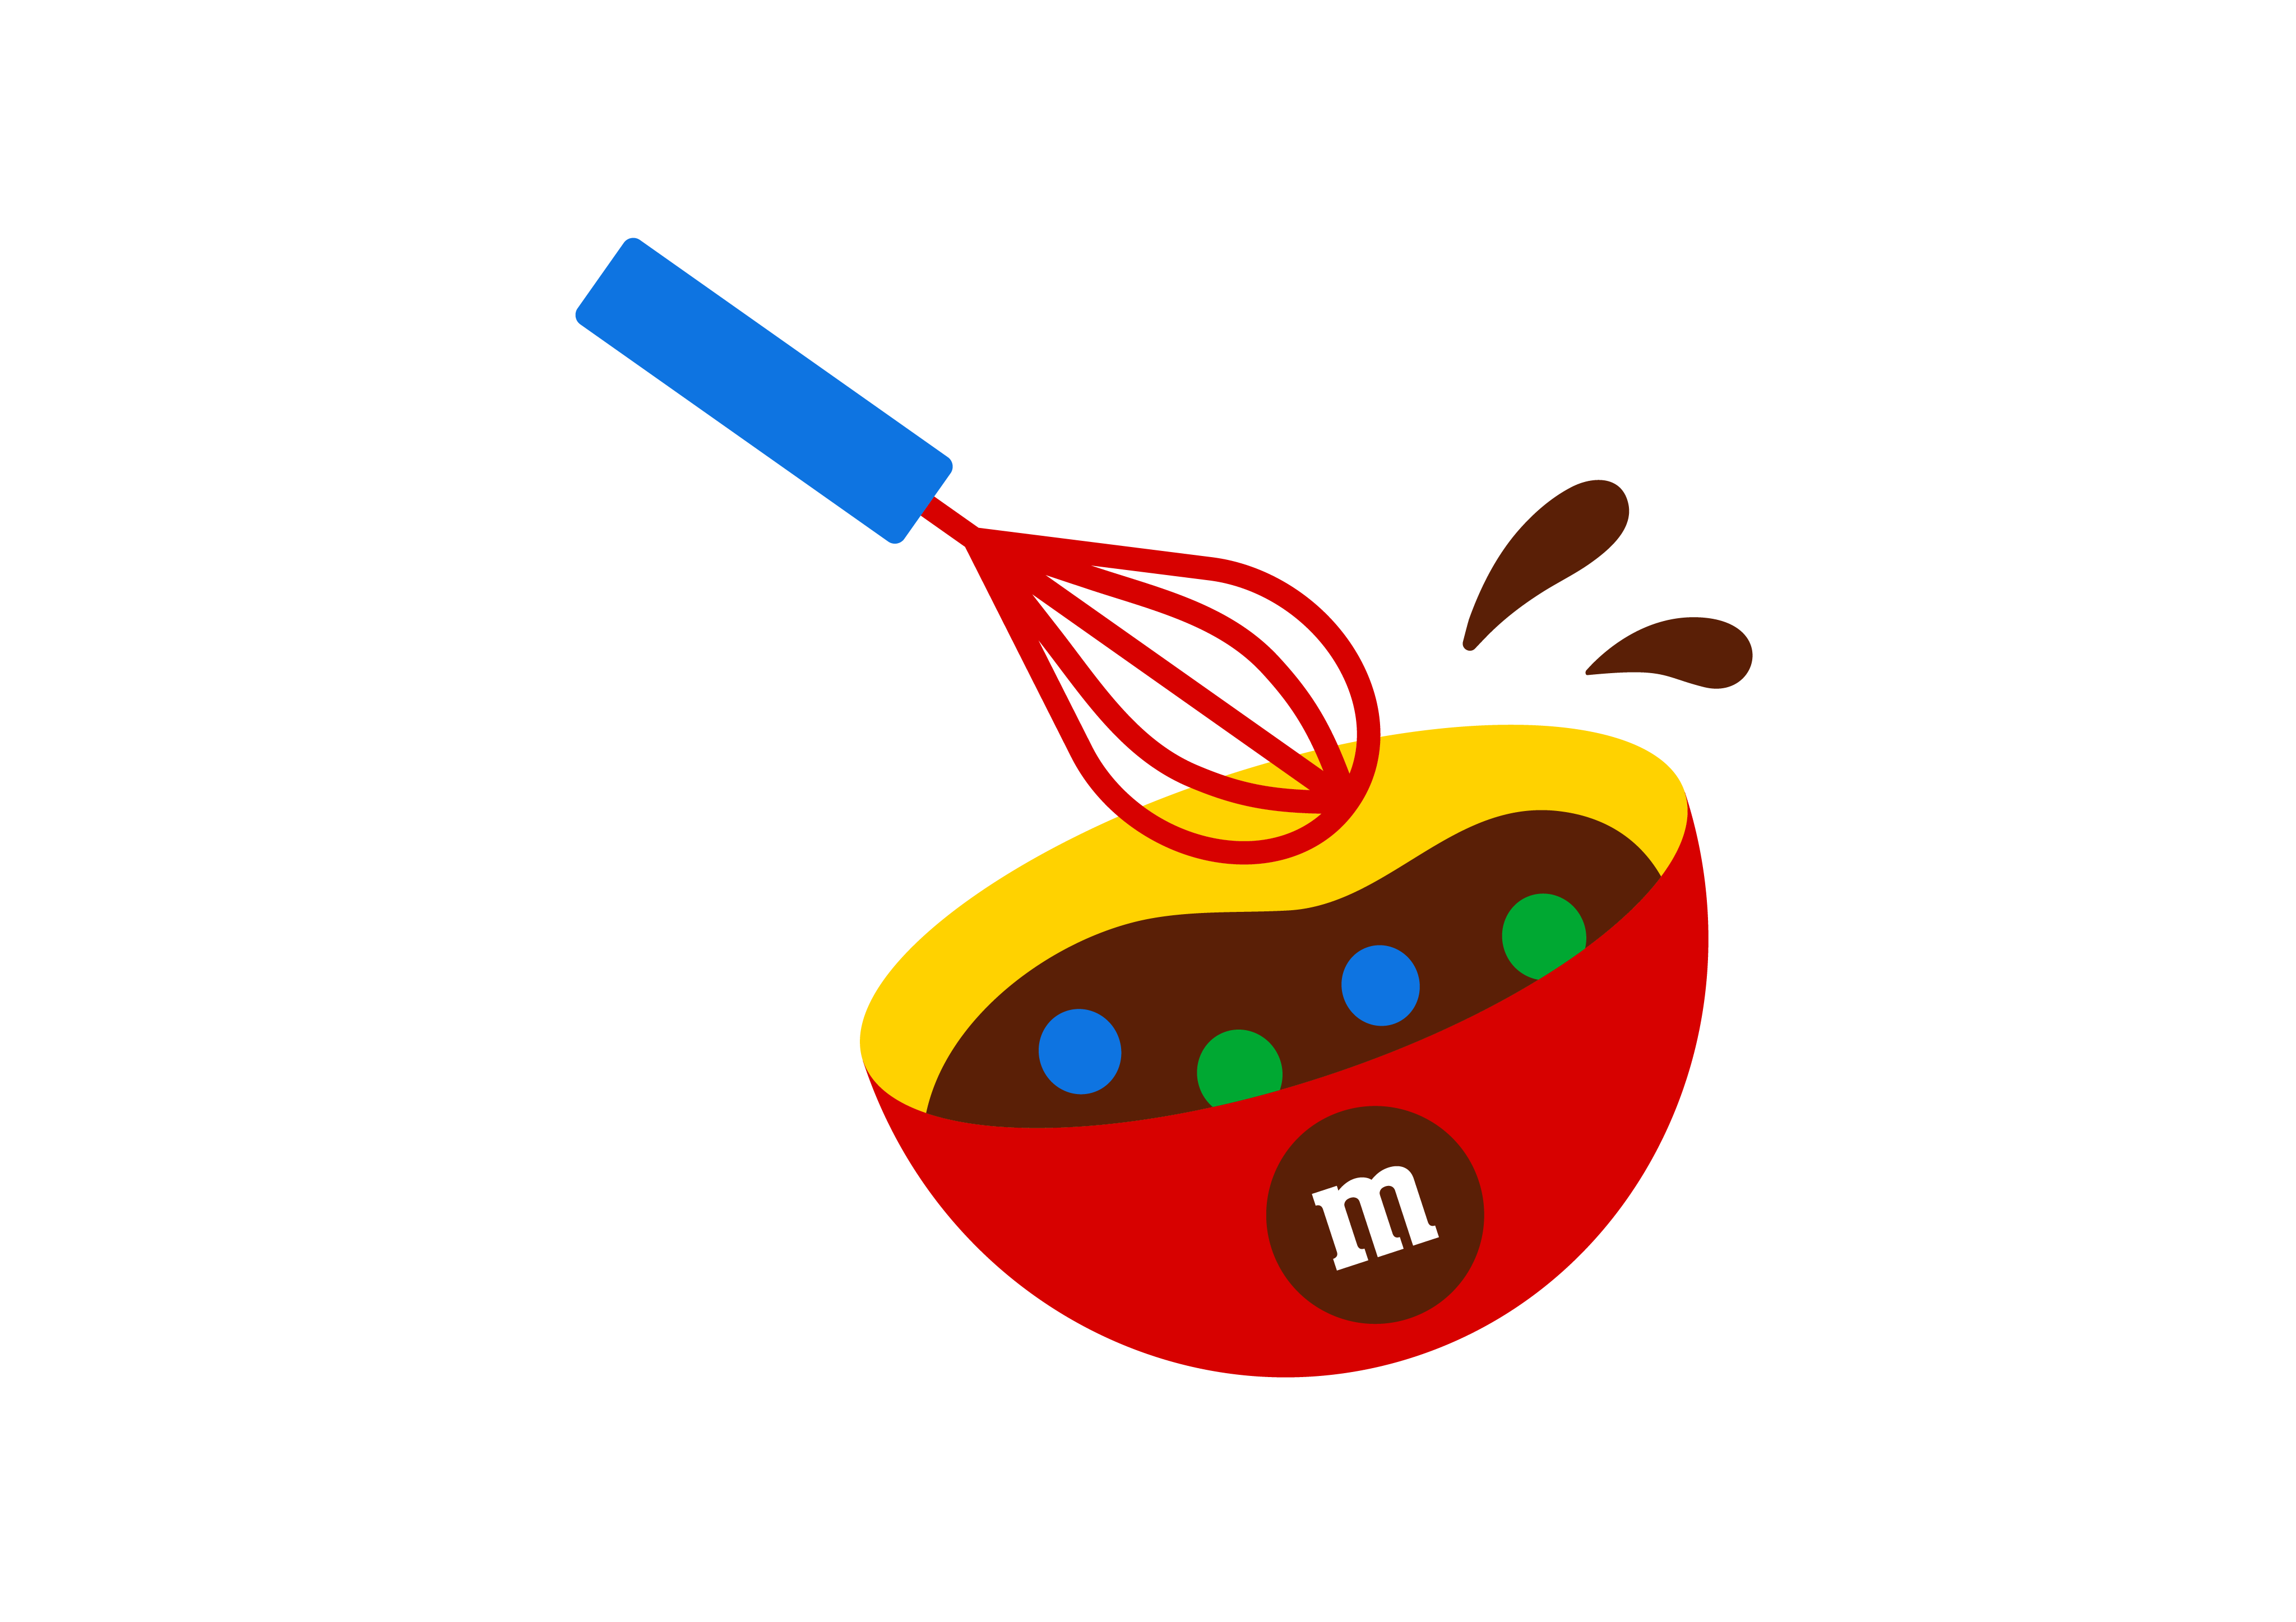 Category:Characters, M&M'S Wiki